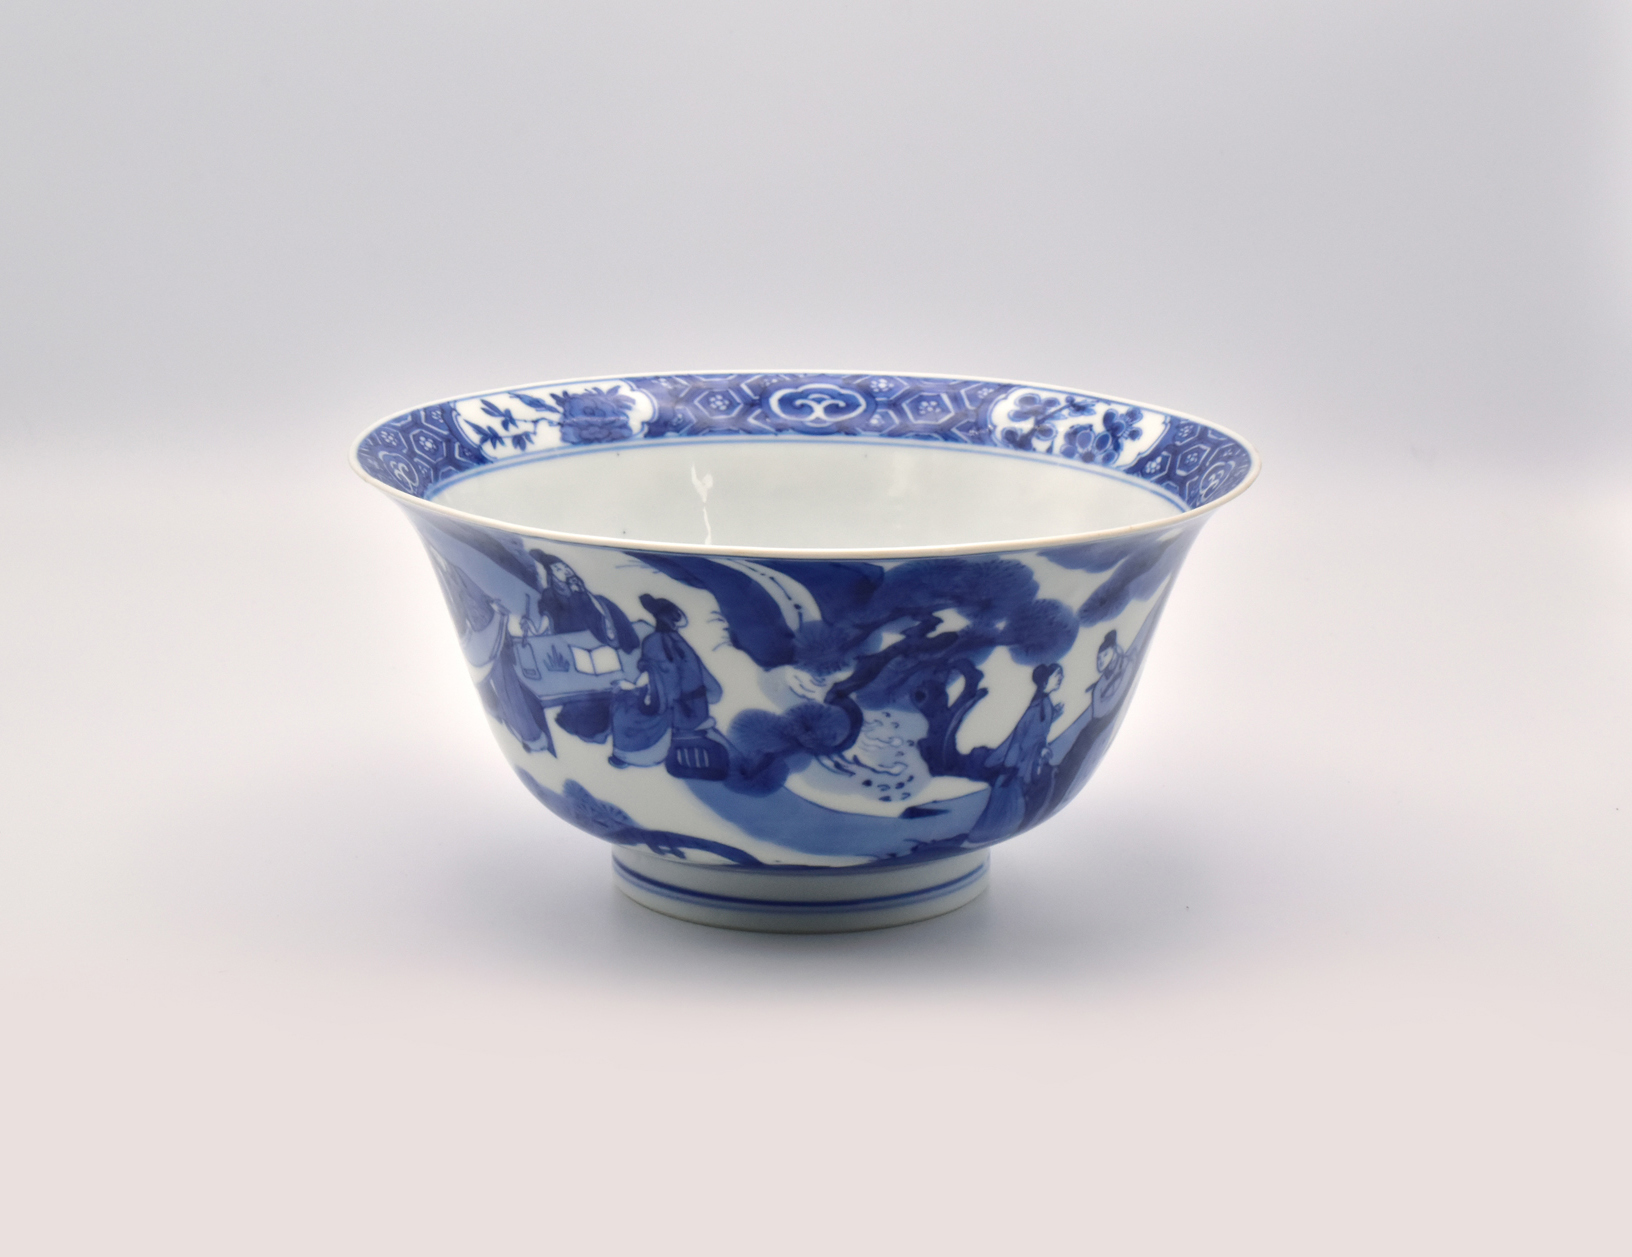 A GOOD CHINESE BLUE AND WHITE PORCELAIN ‘EIGHTEEN SCHOLARS’ BOWL, KANGXI PERIOD, 1662 – 1722 - Image 4 of 22